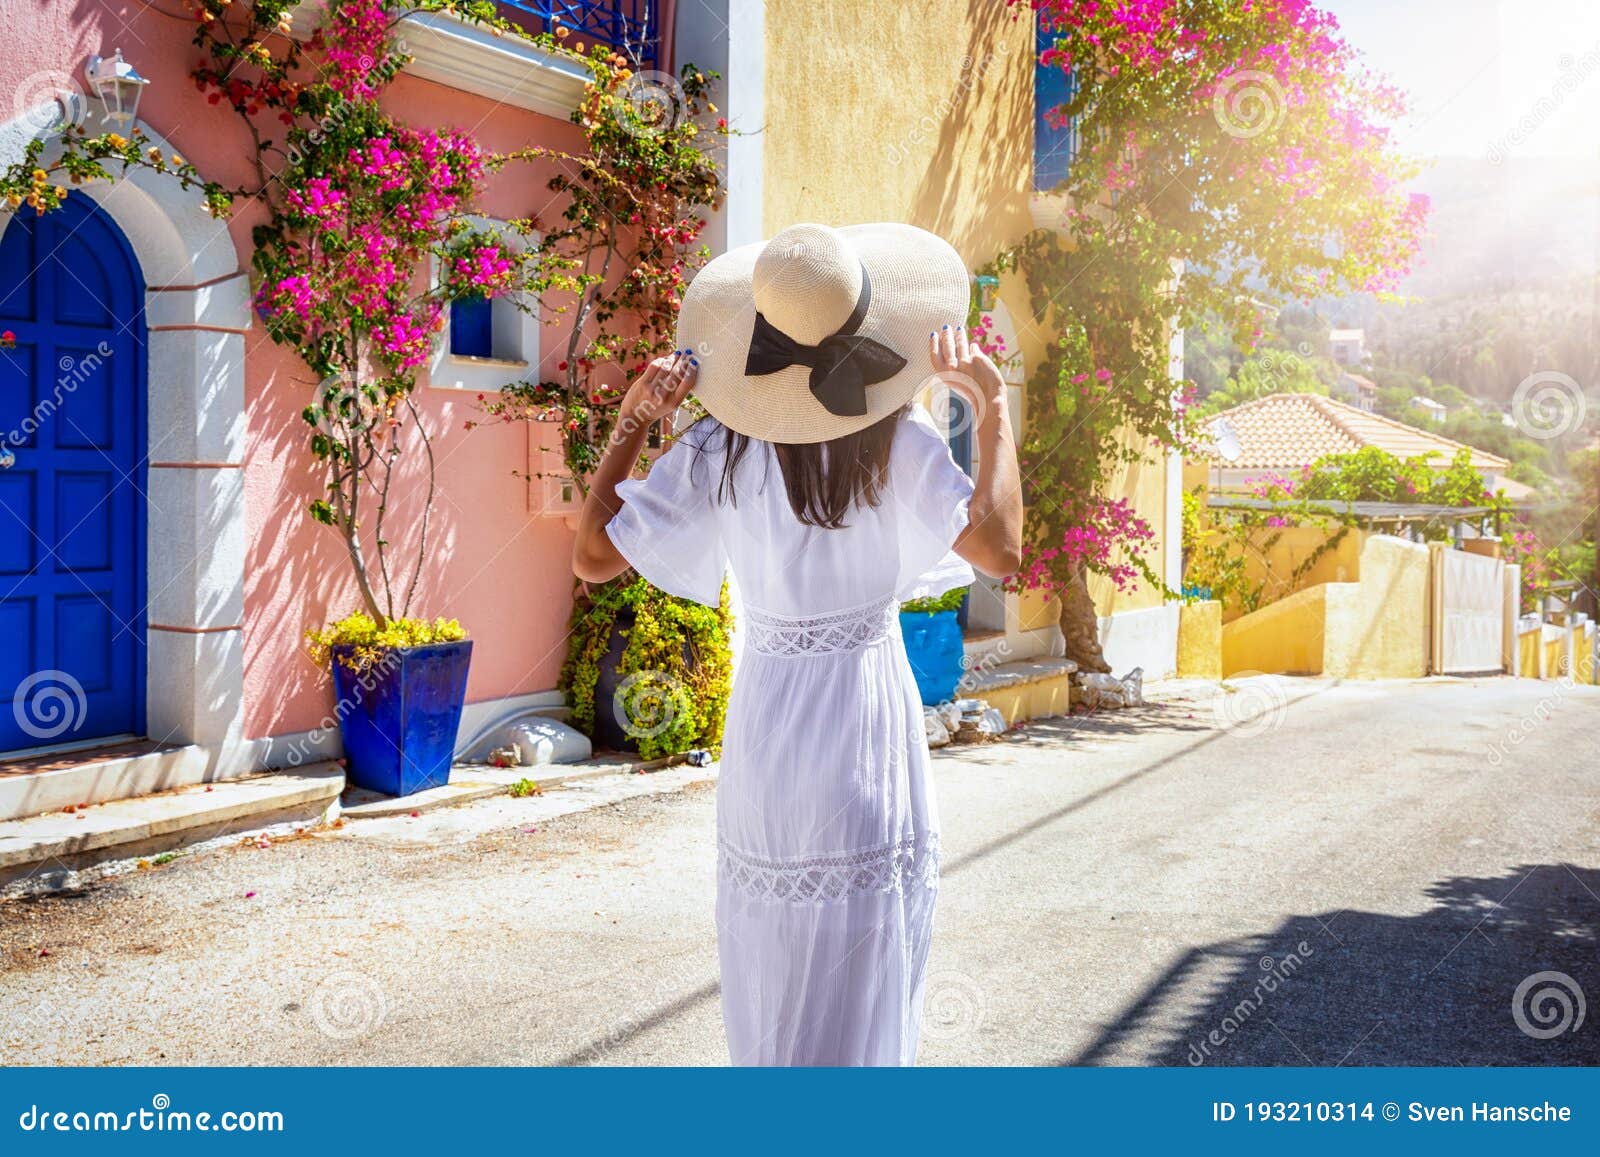 a woman in a white summer dress walks down the colorful streets of the little village assos, kefalonia, greece